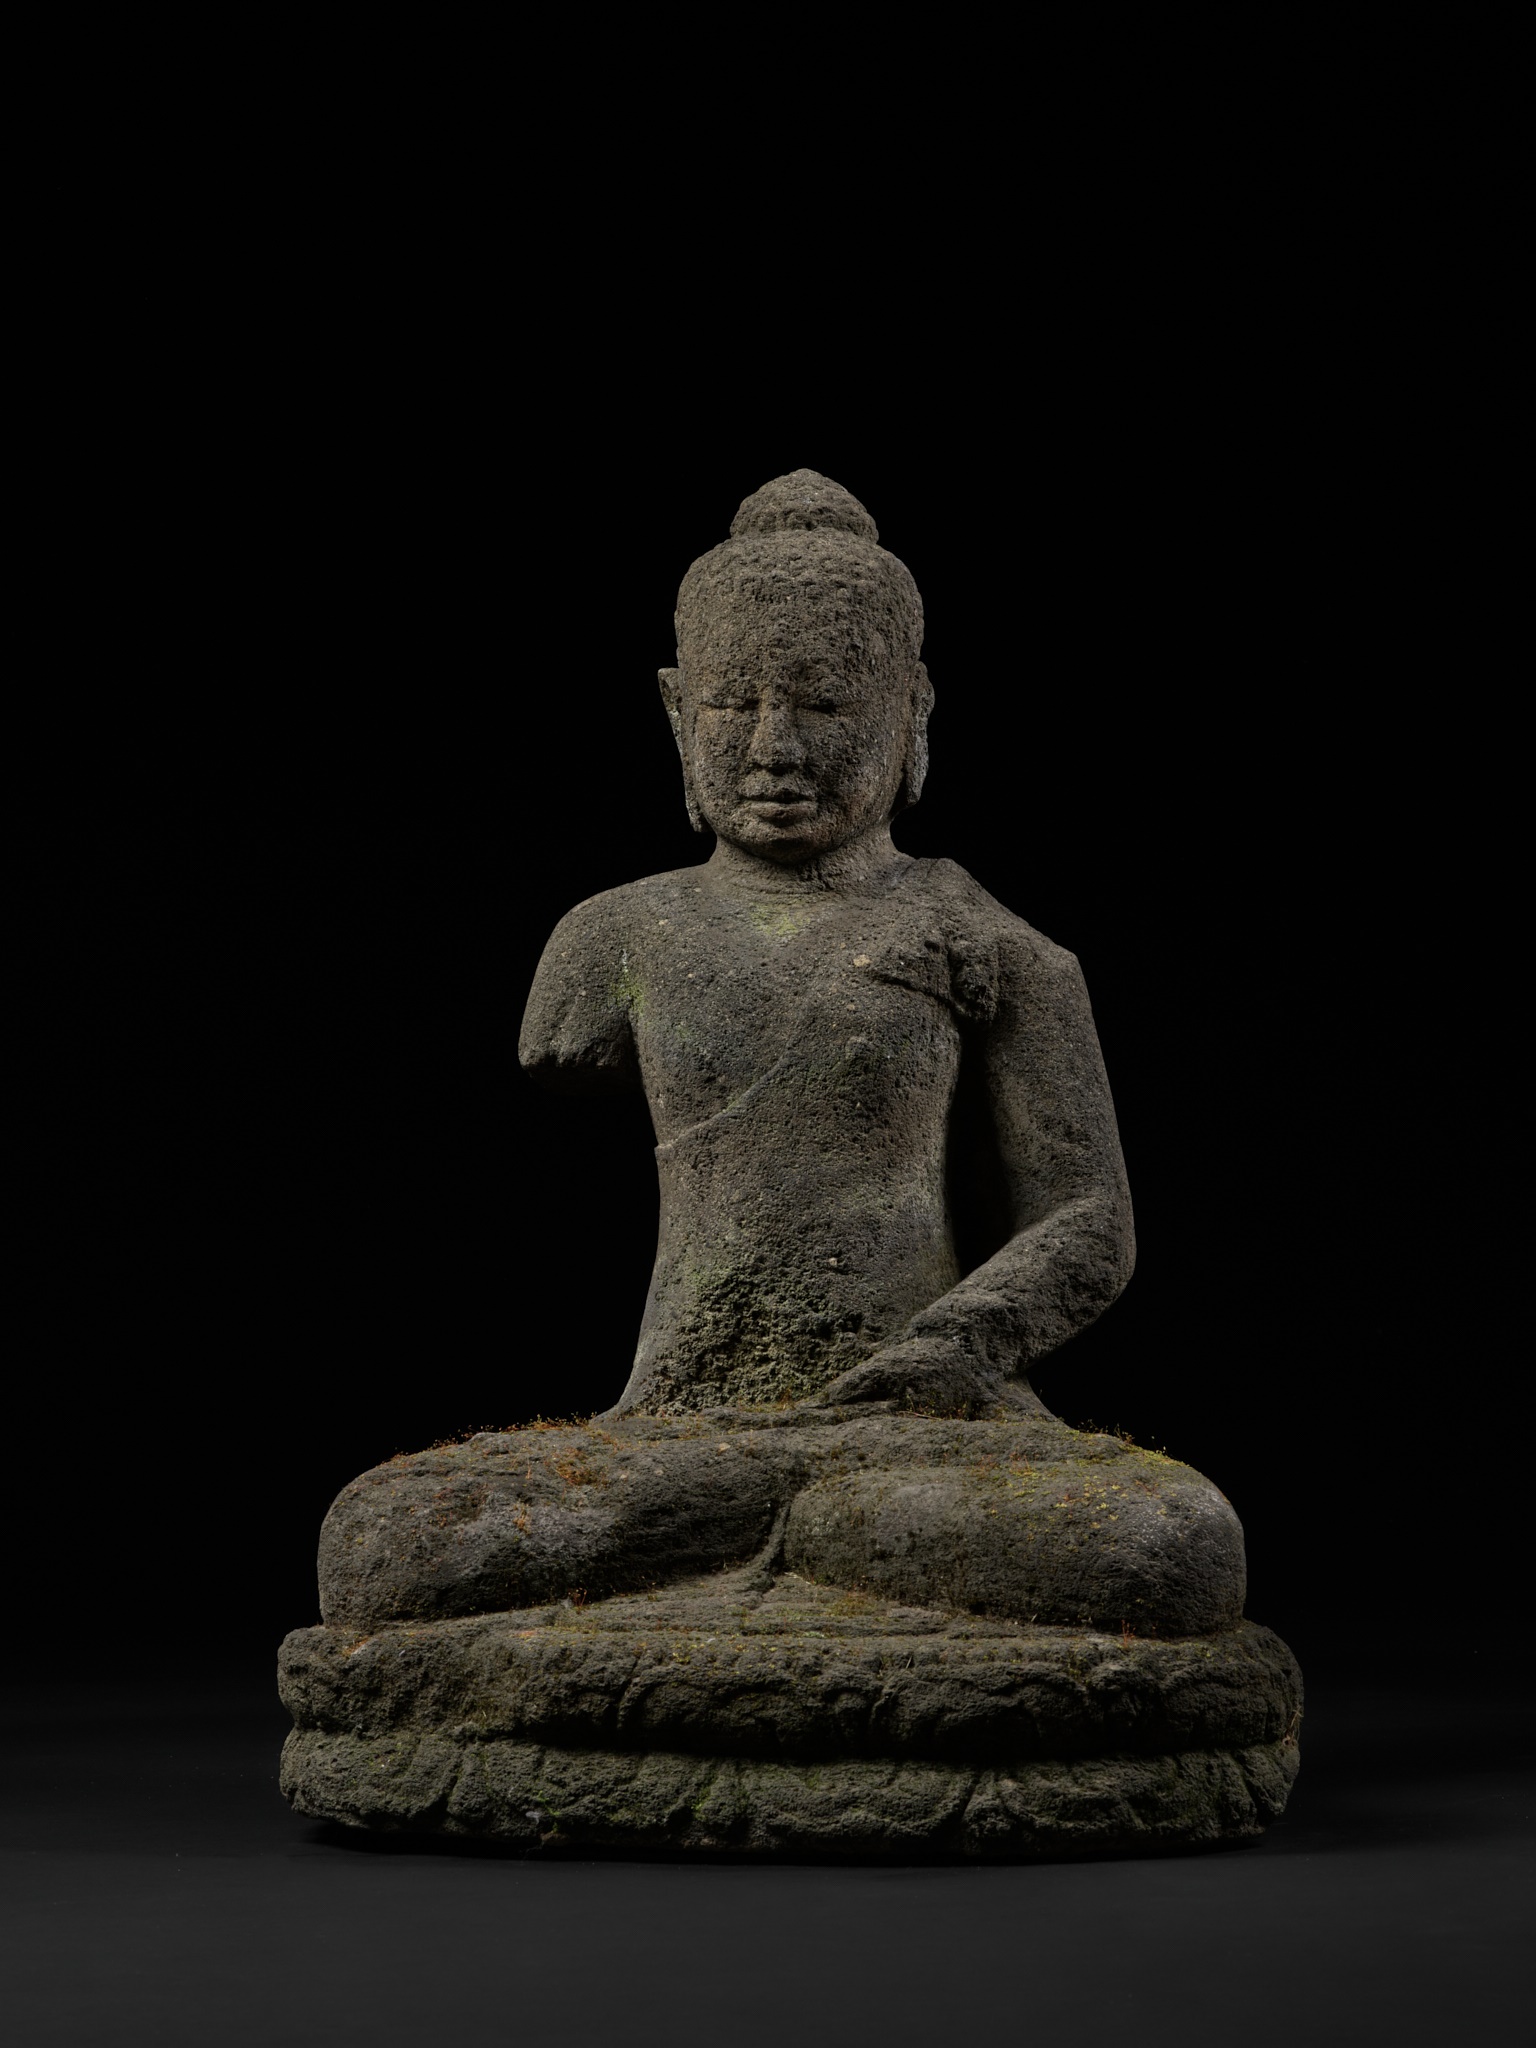 A VOLCANIC STONE FIGURE OF BUDDHA, CENTRAL JAVA, INDONESIA, FIRST HALF OF THE 9TH CENTURY - Image 2 of 14